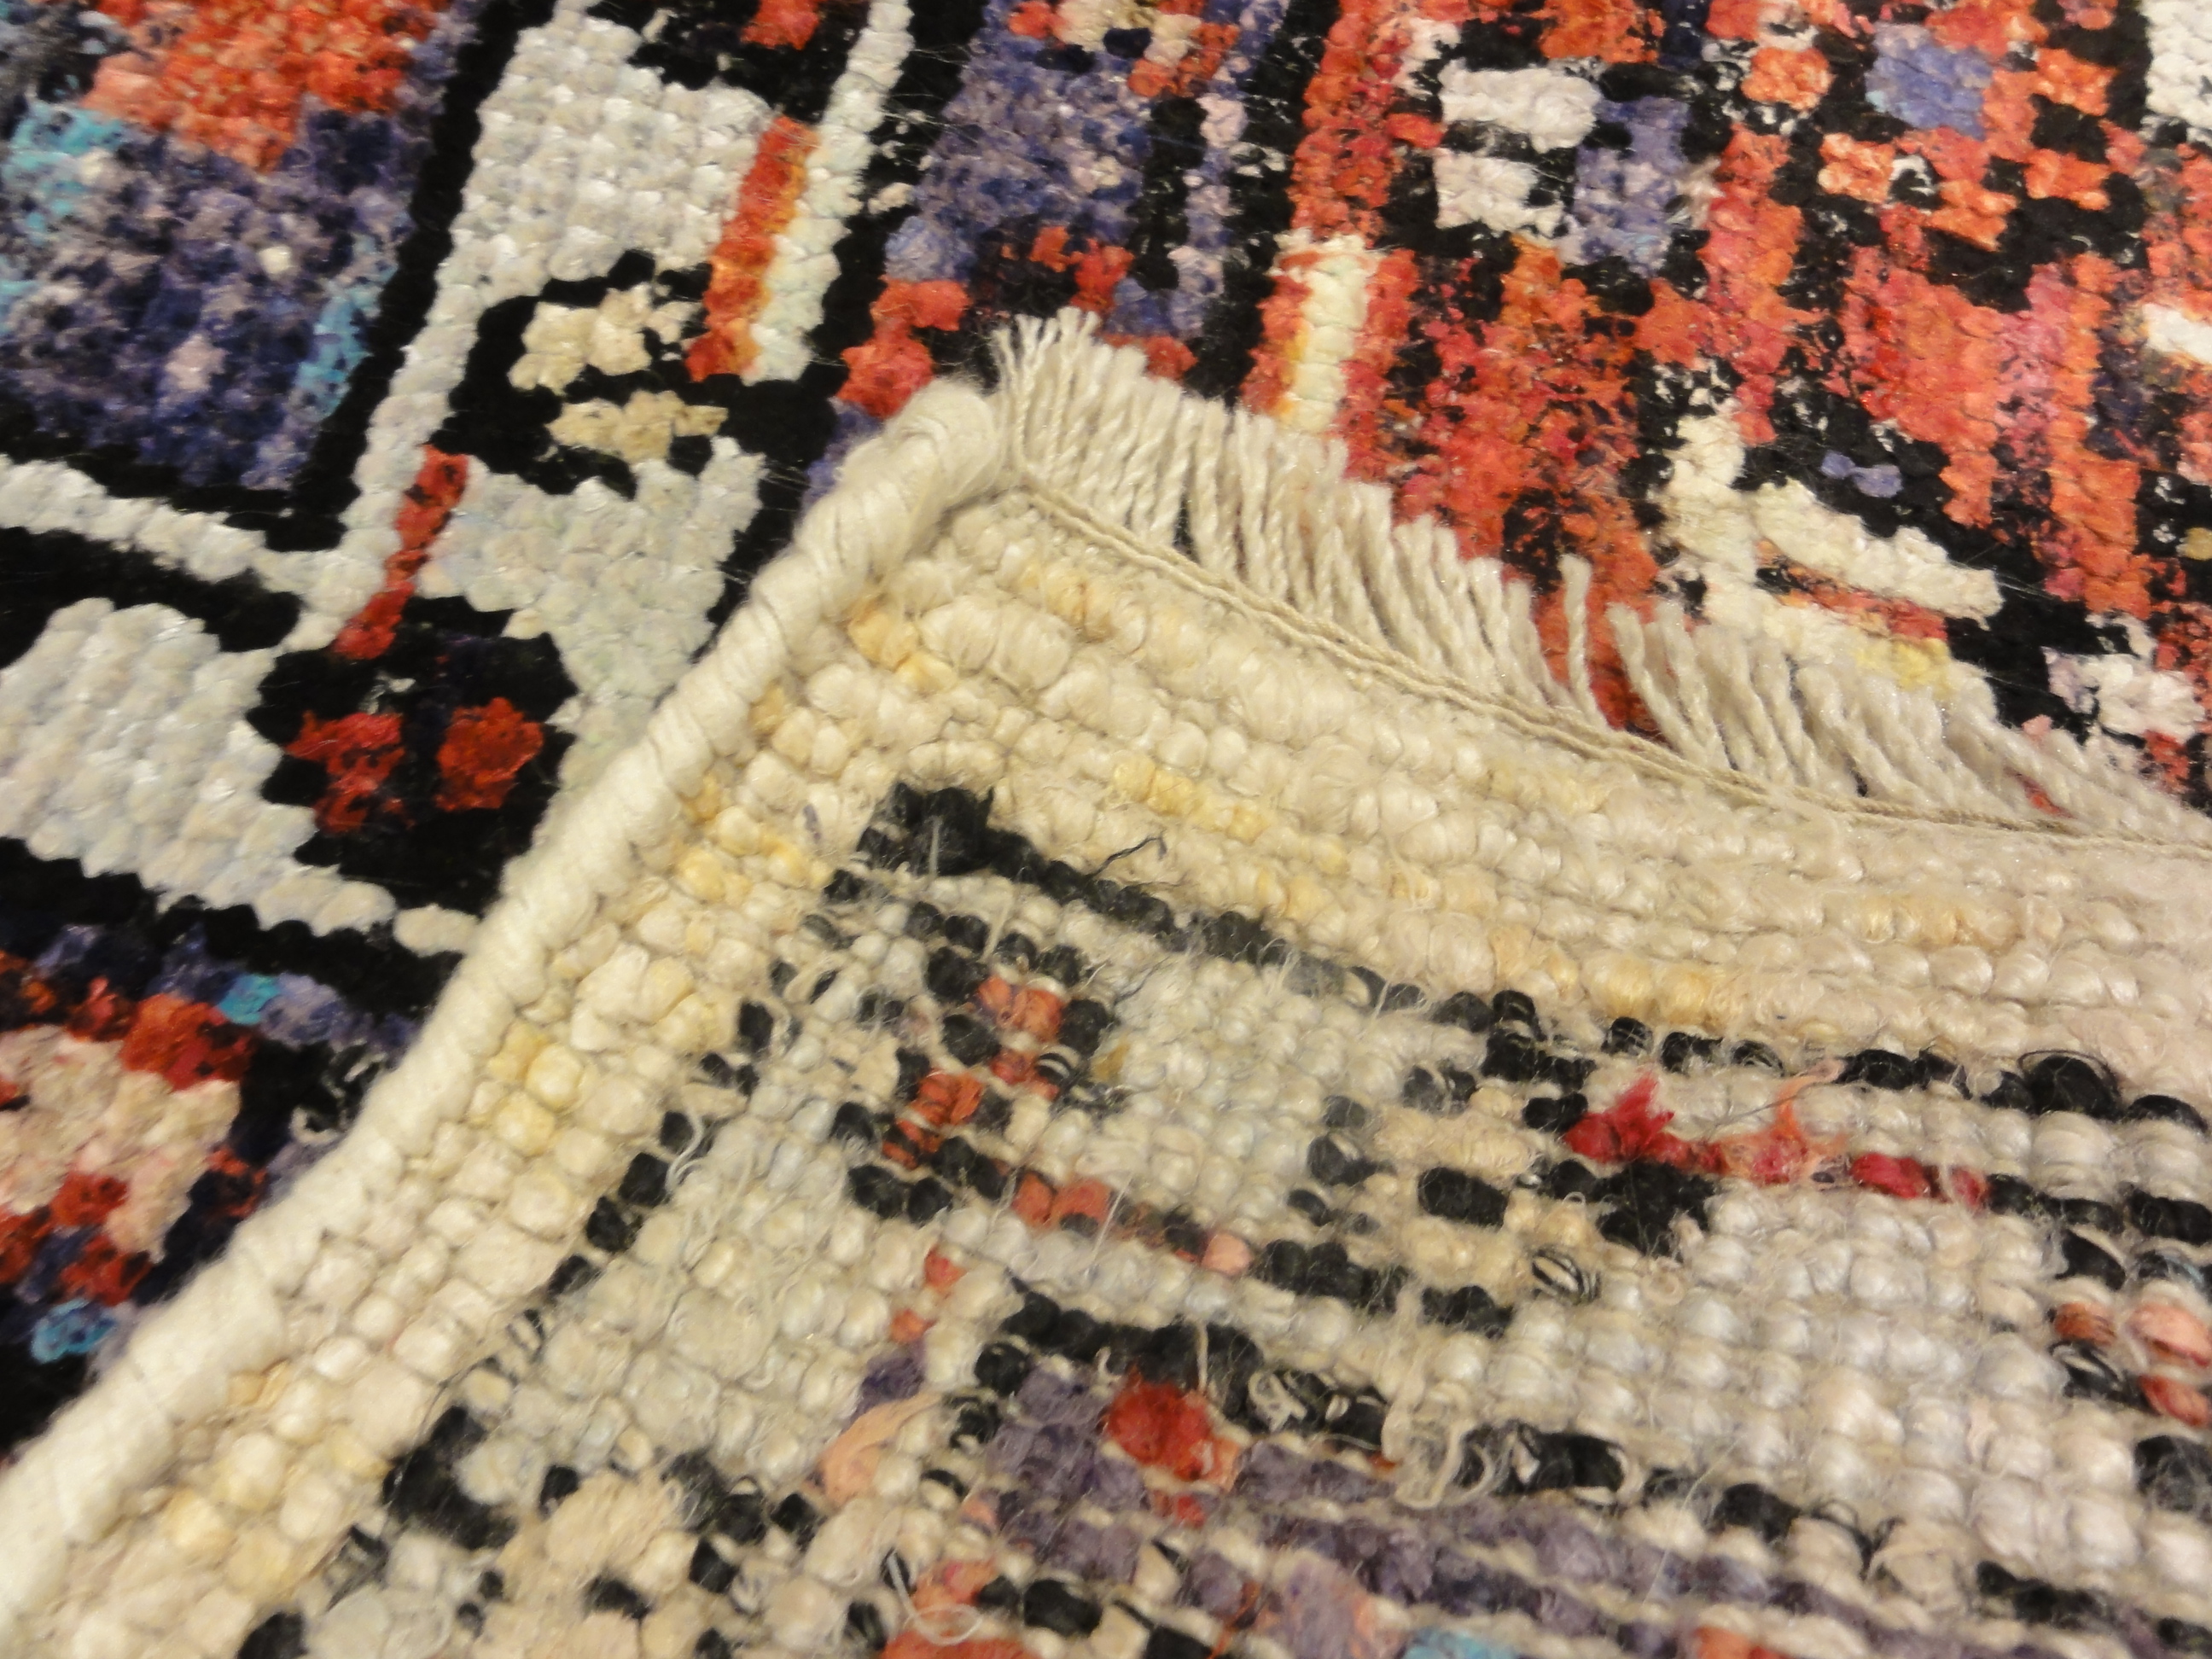 Saree Silk Indian Rug. A piece of genuine woven authentic carpet art sold by Santa Barbara Design Center and Rugs and More.